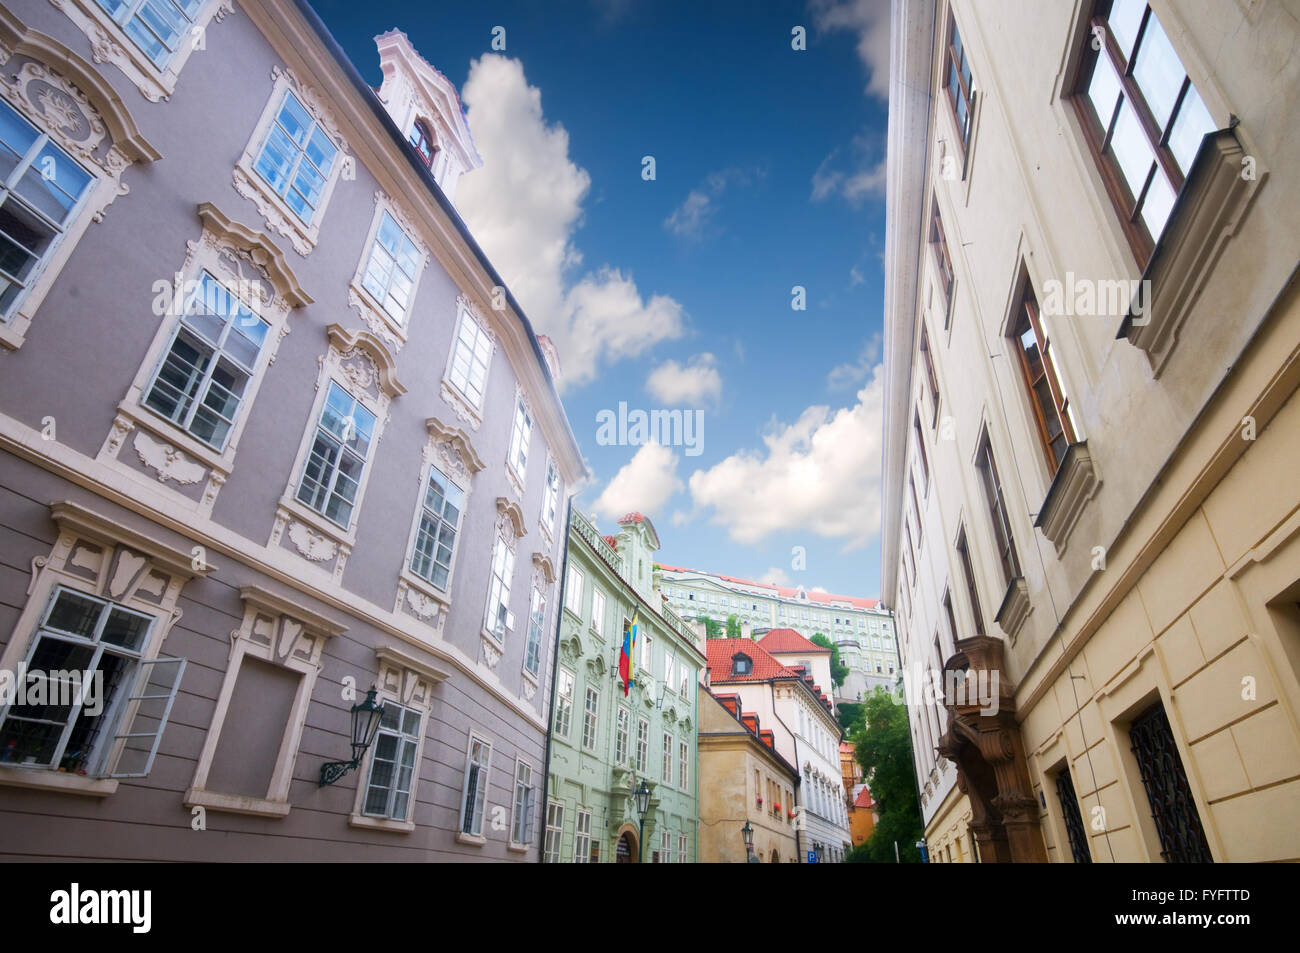 Prague. Old, charming buildings Stock Photo